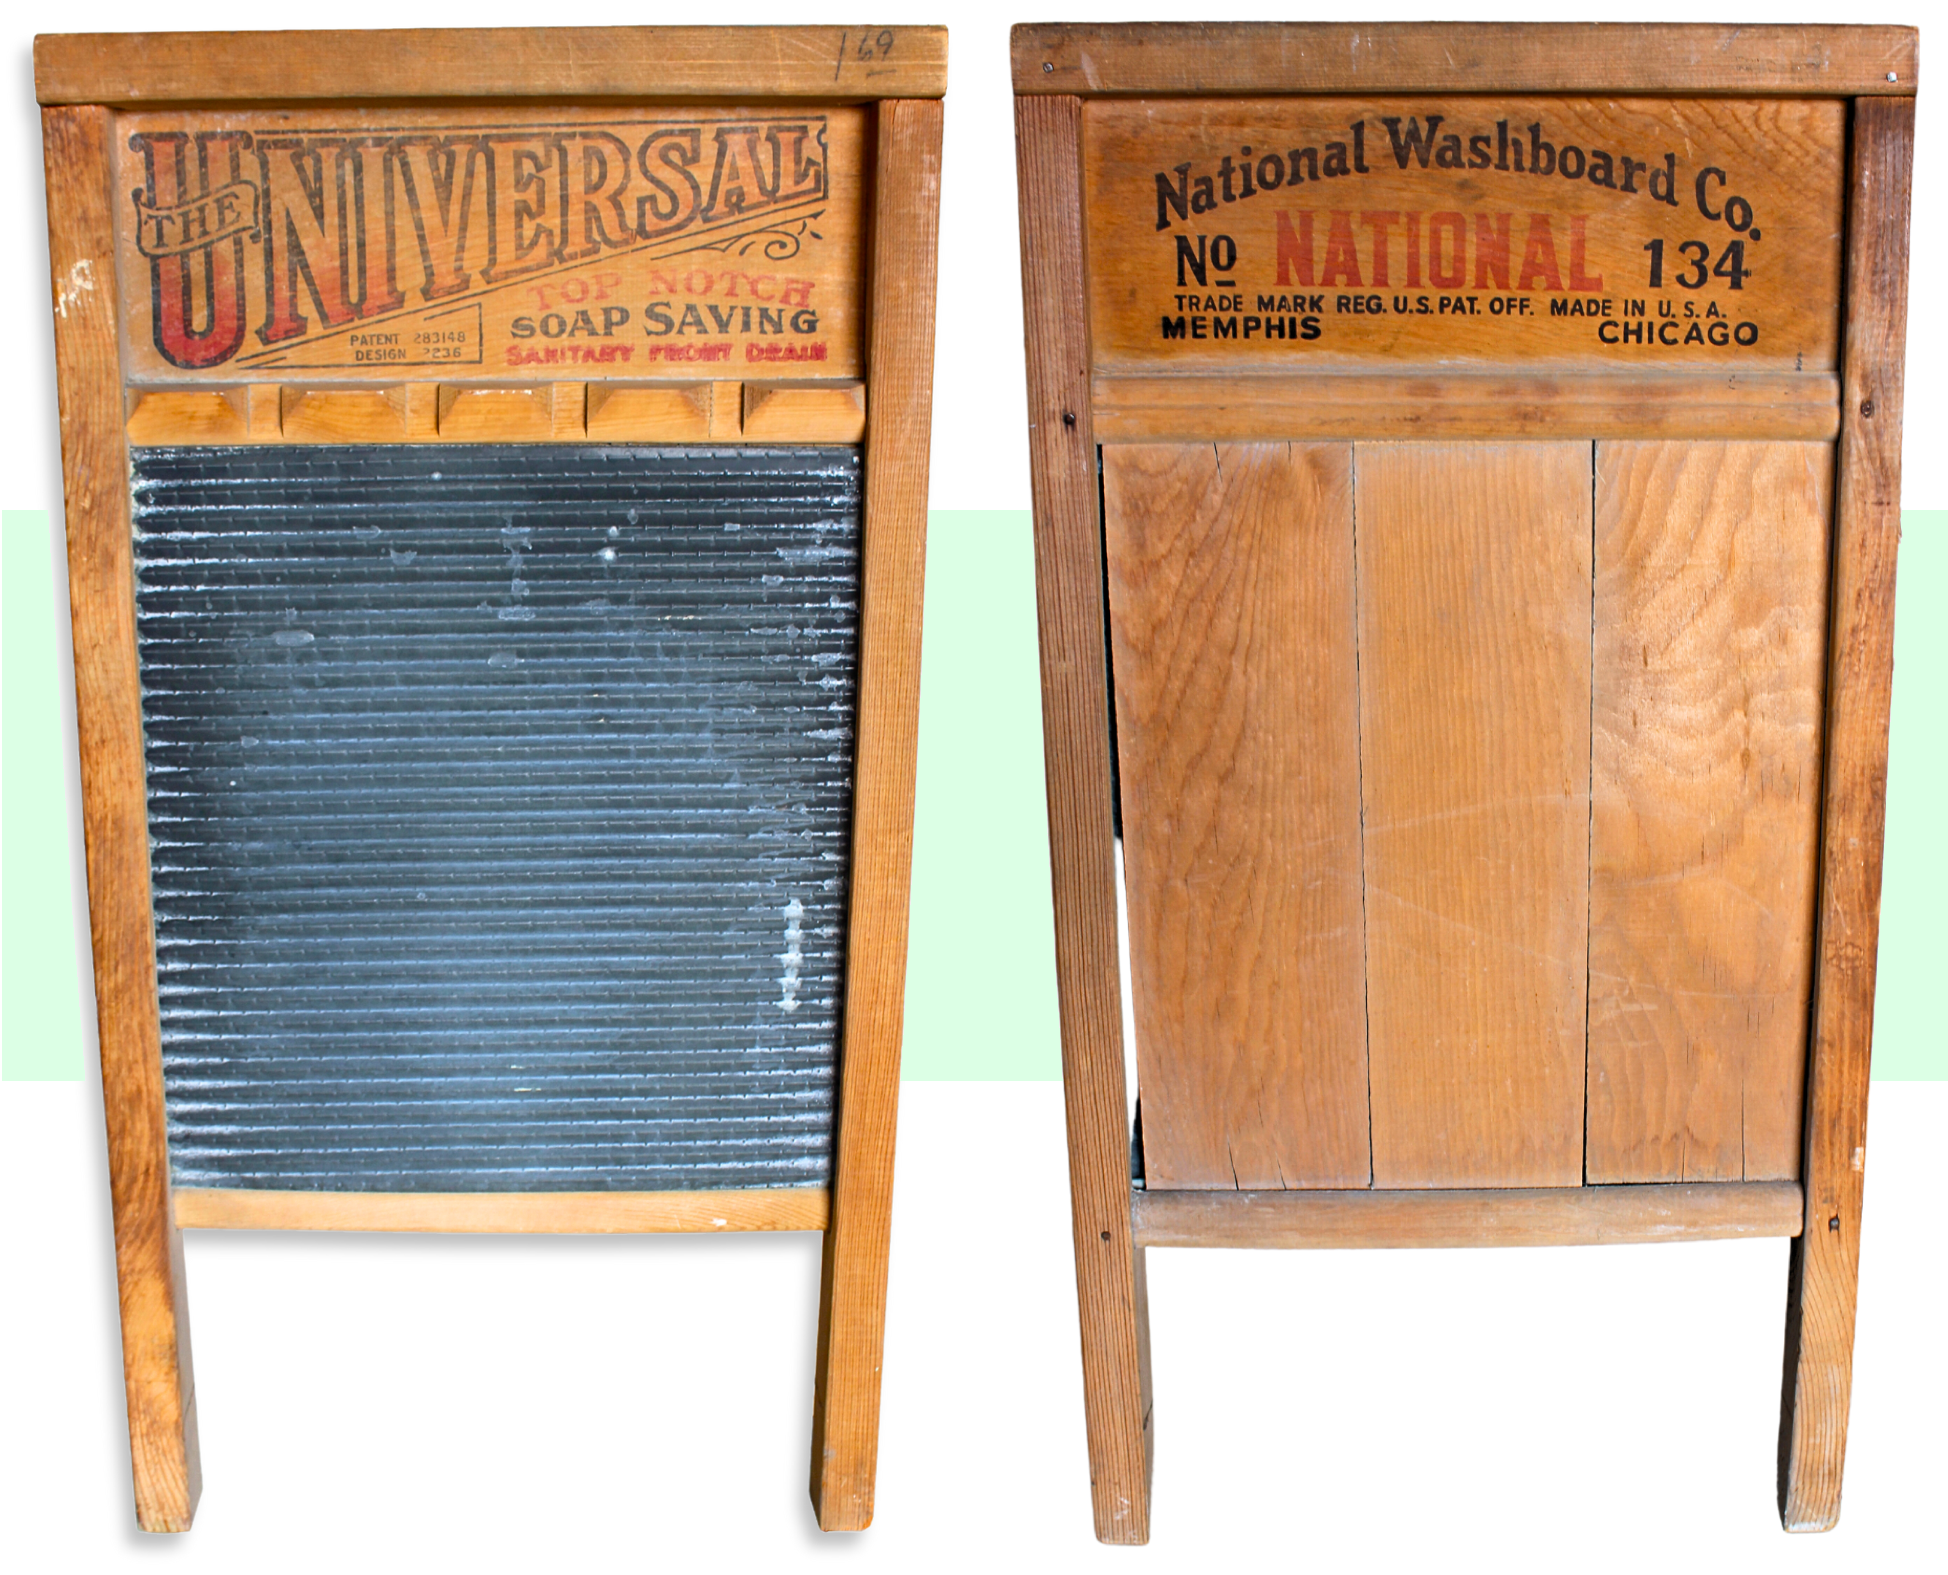 National Washboard Company, est. 1903 - Made-in-Chicago Museum